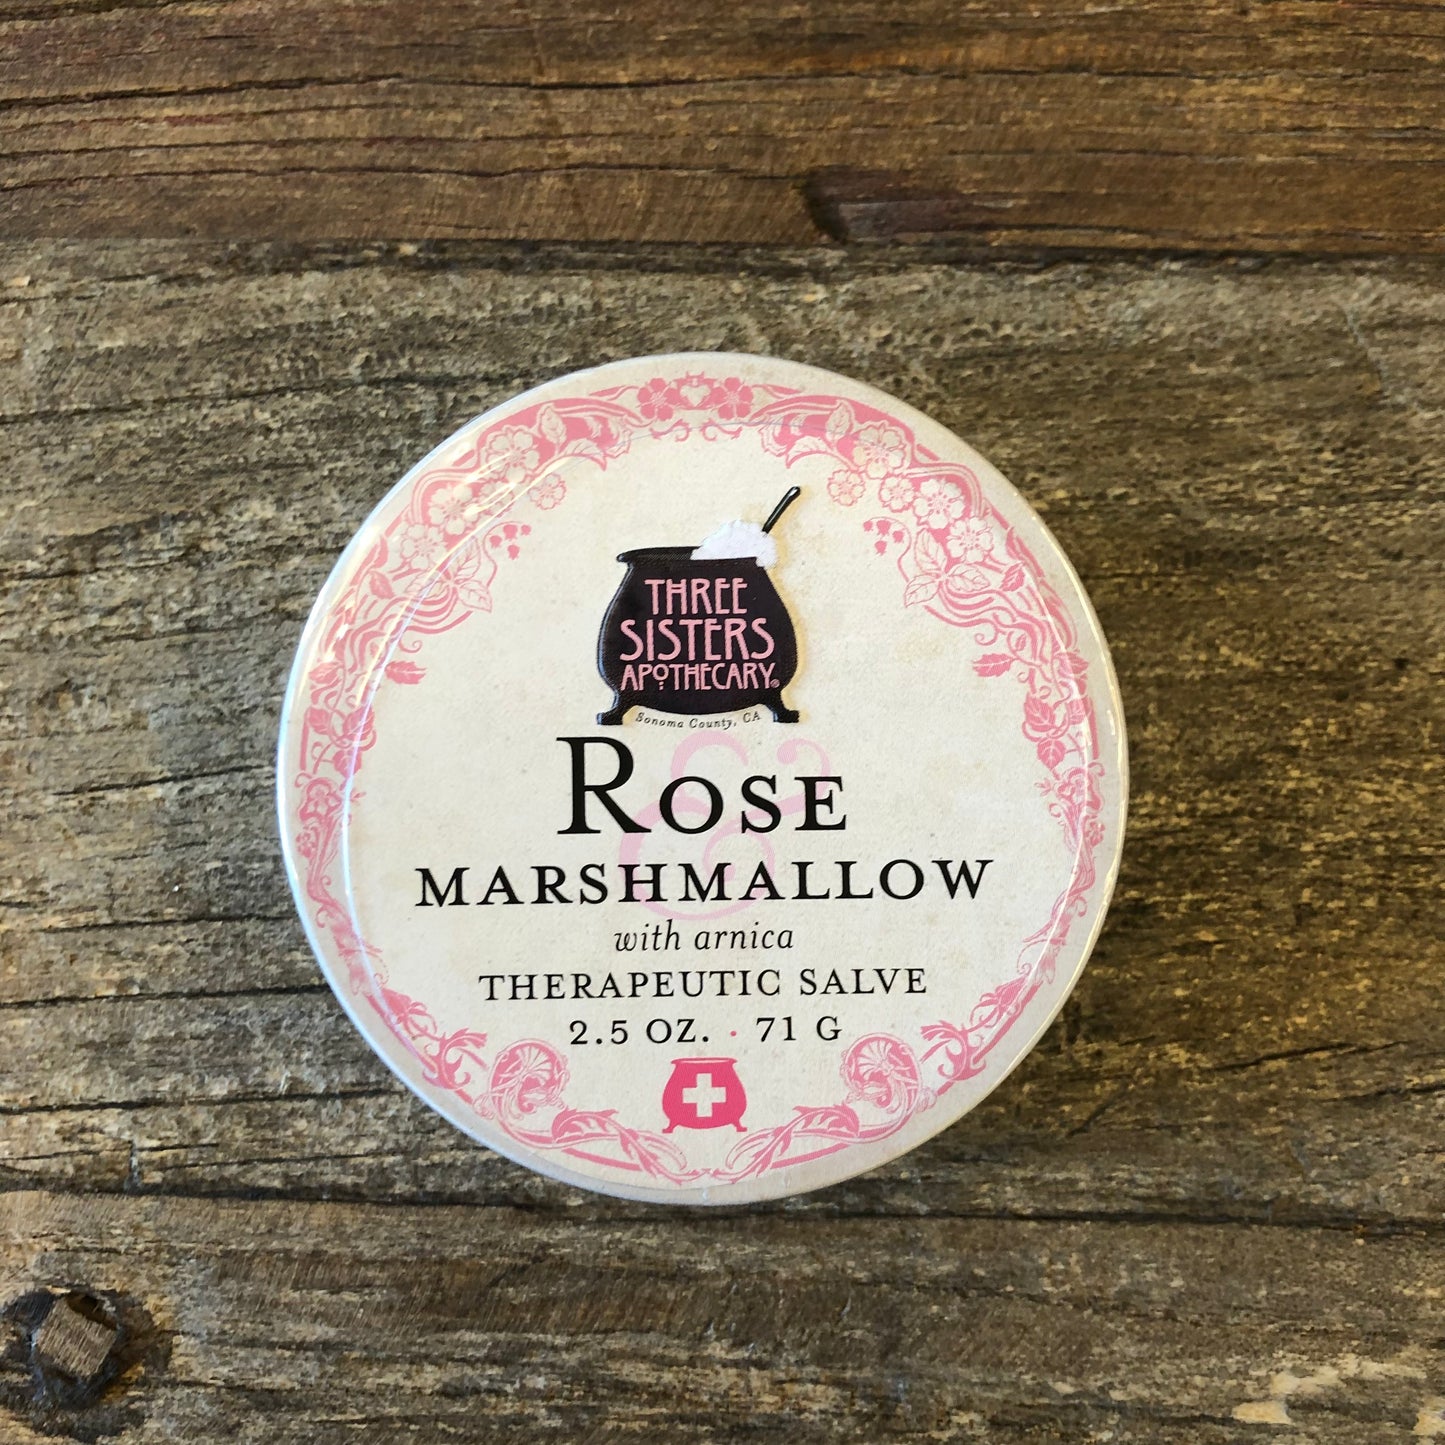 Rose Marshmallow with Arnica Therapeutic Salve 2.5oz